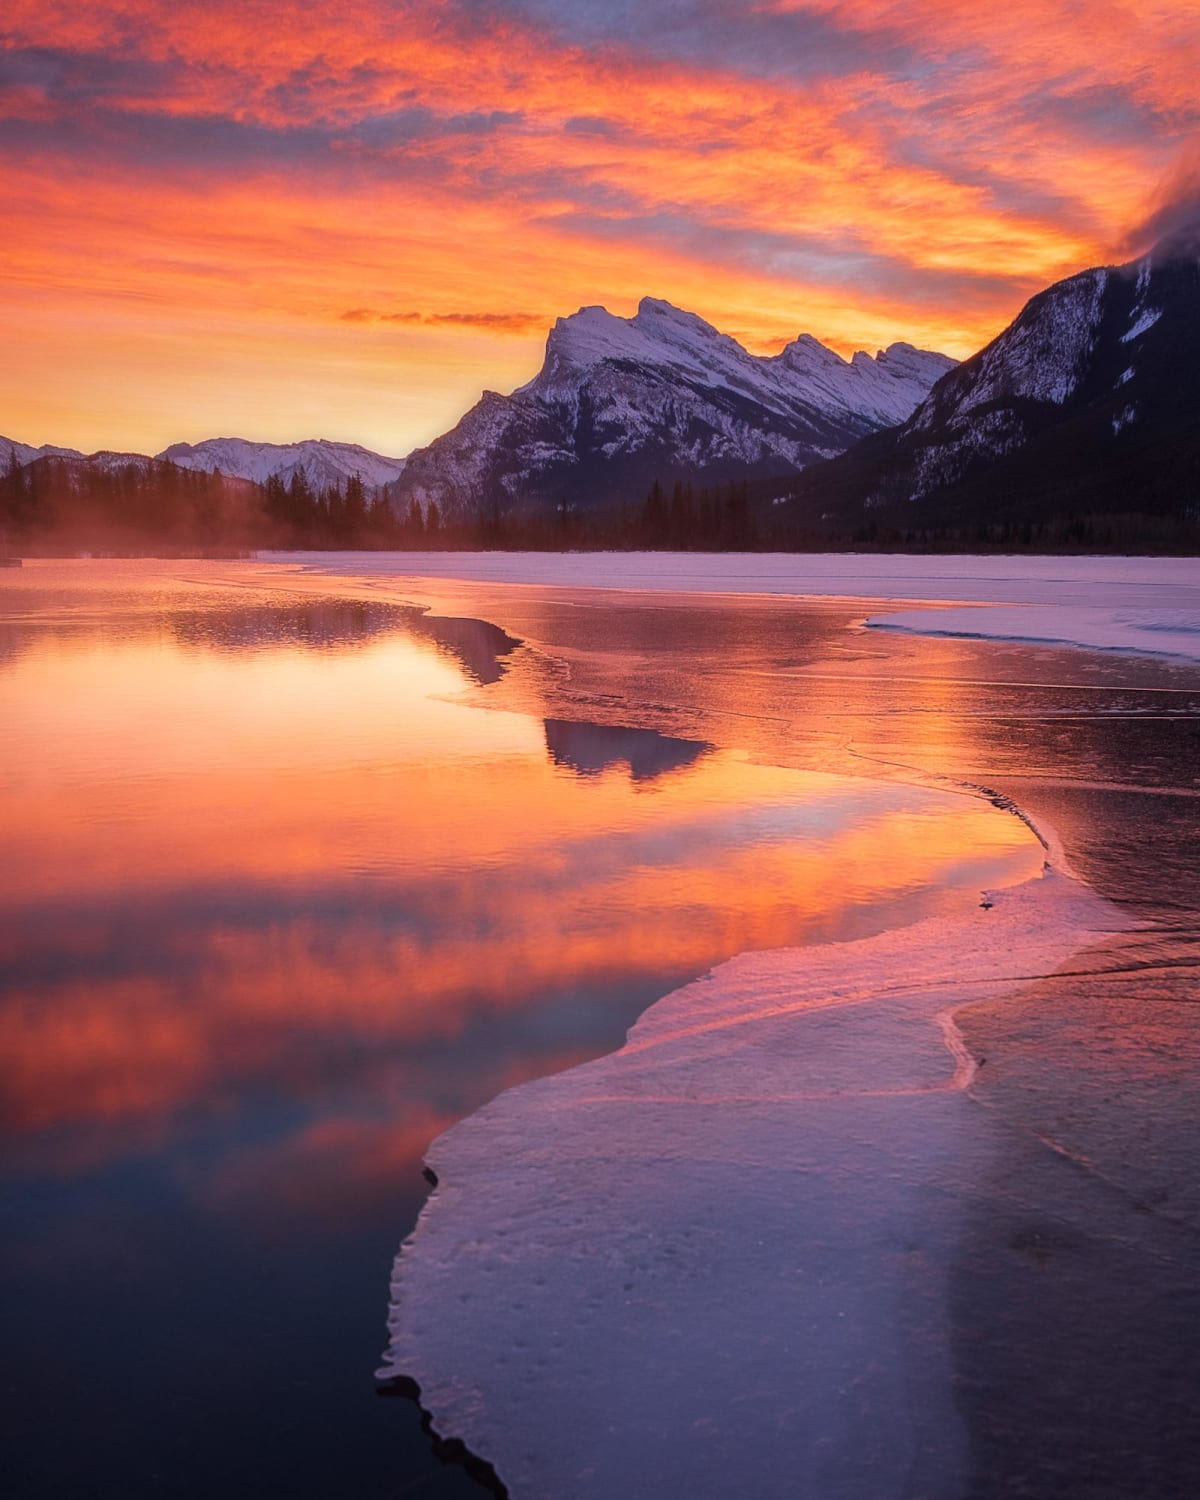 My personal favorite sunrise moment at Vermillion lakes in Banff, Canada.